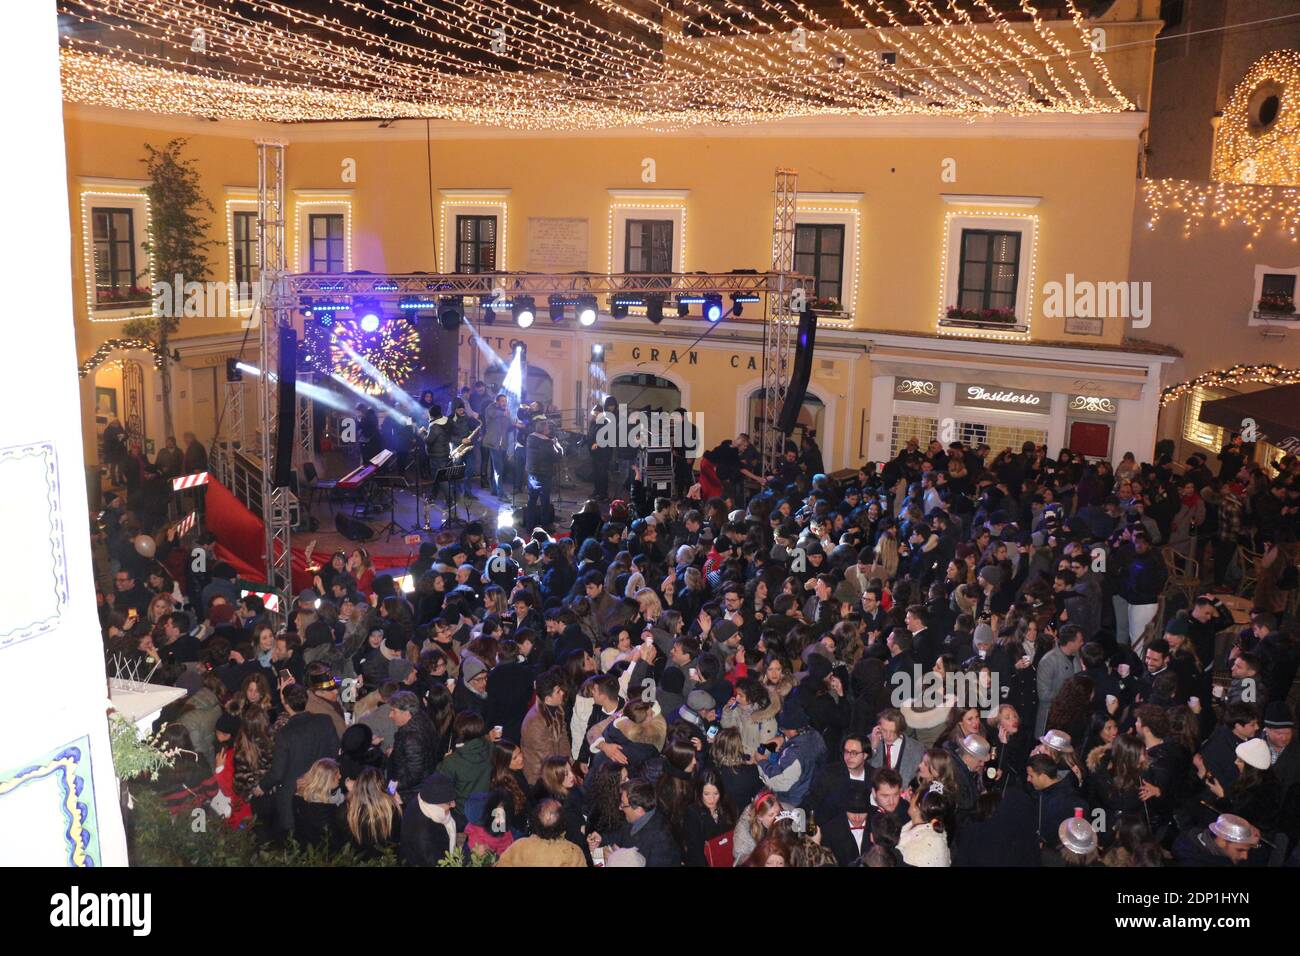 Capodanno High Resolution Stock Photography and Images - Alamy